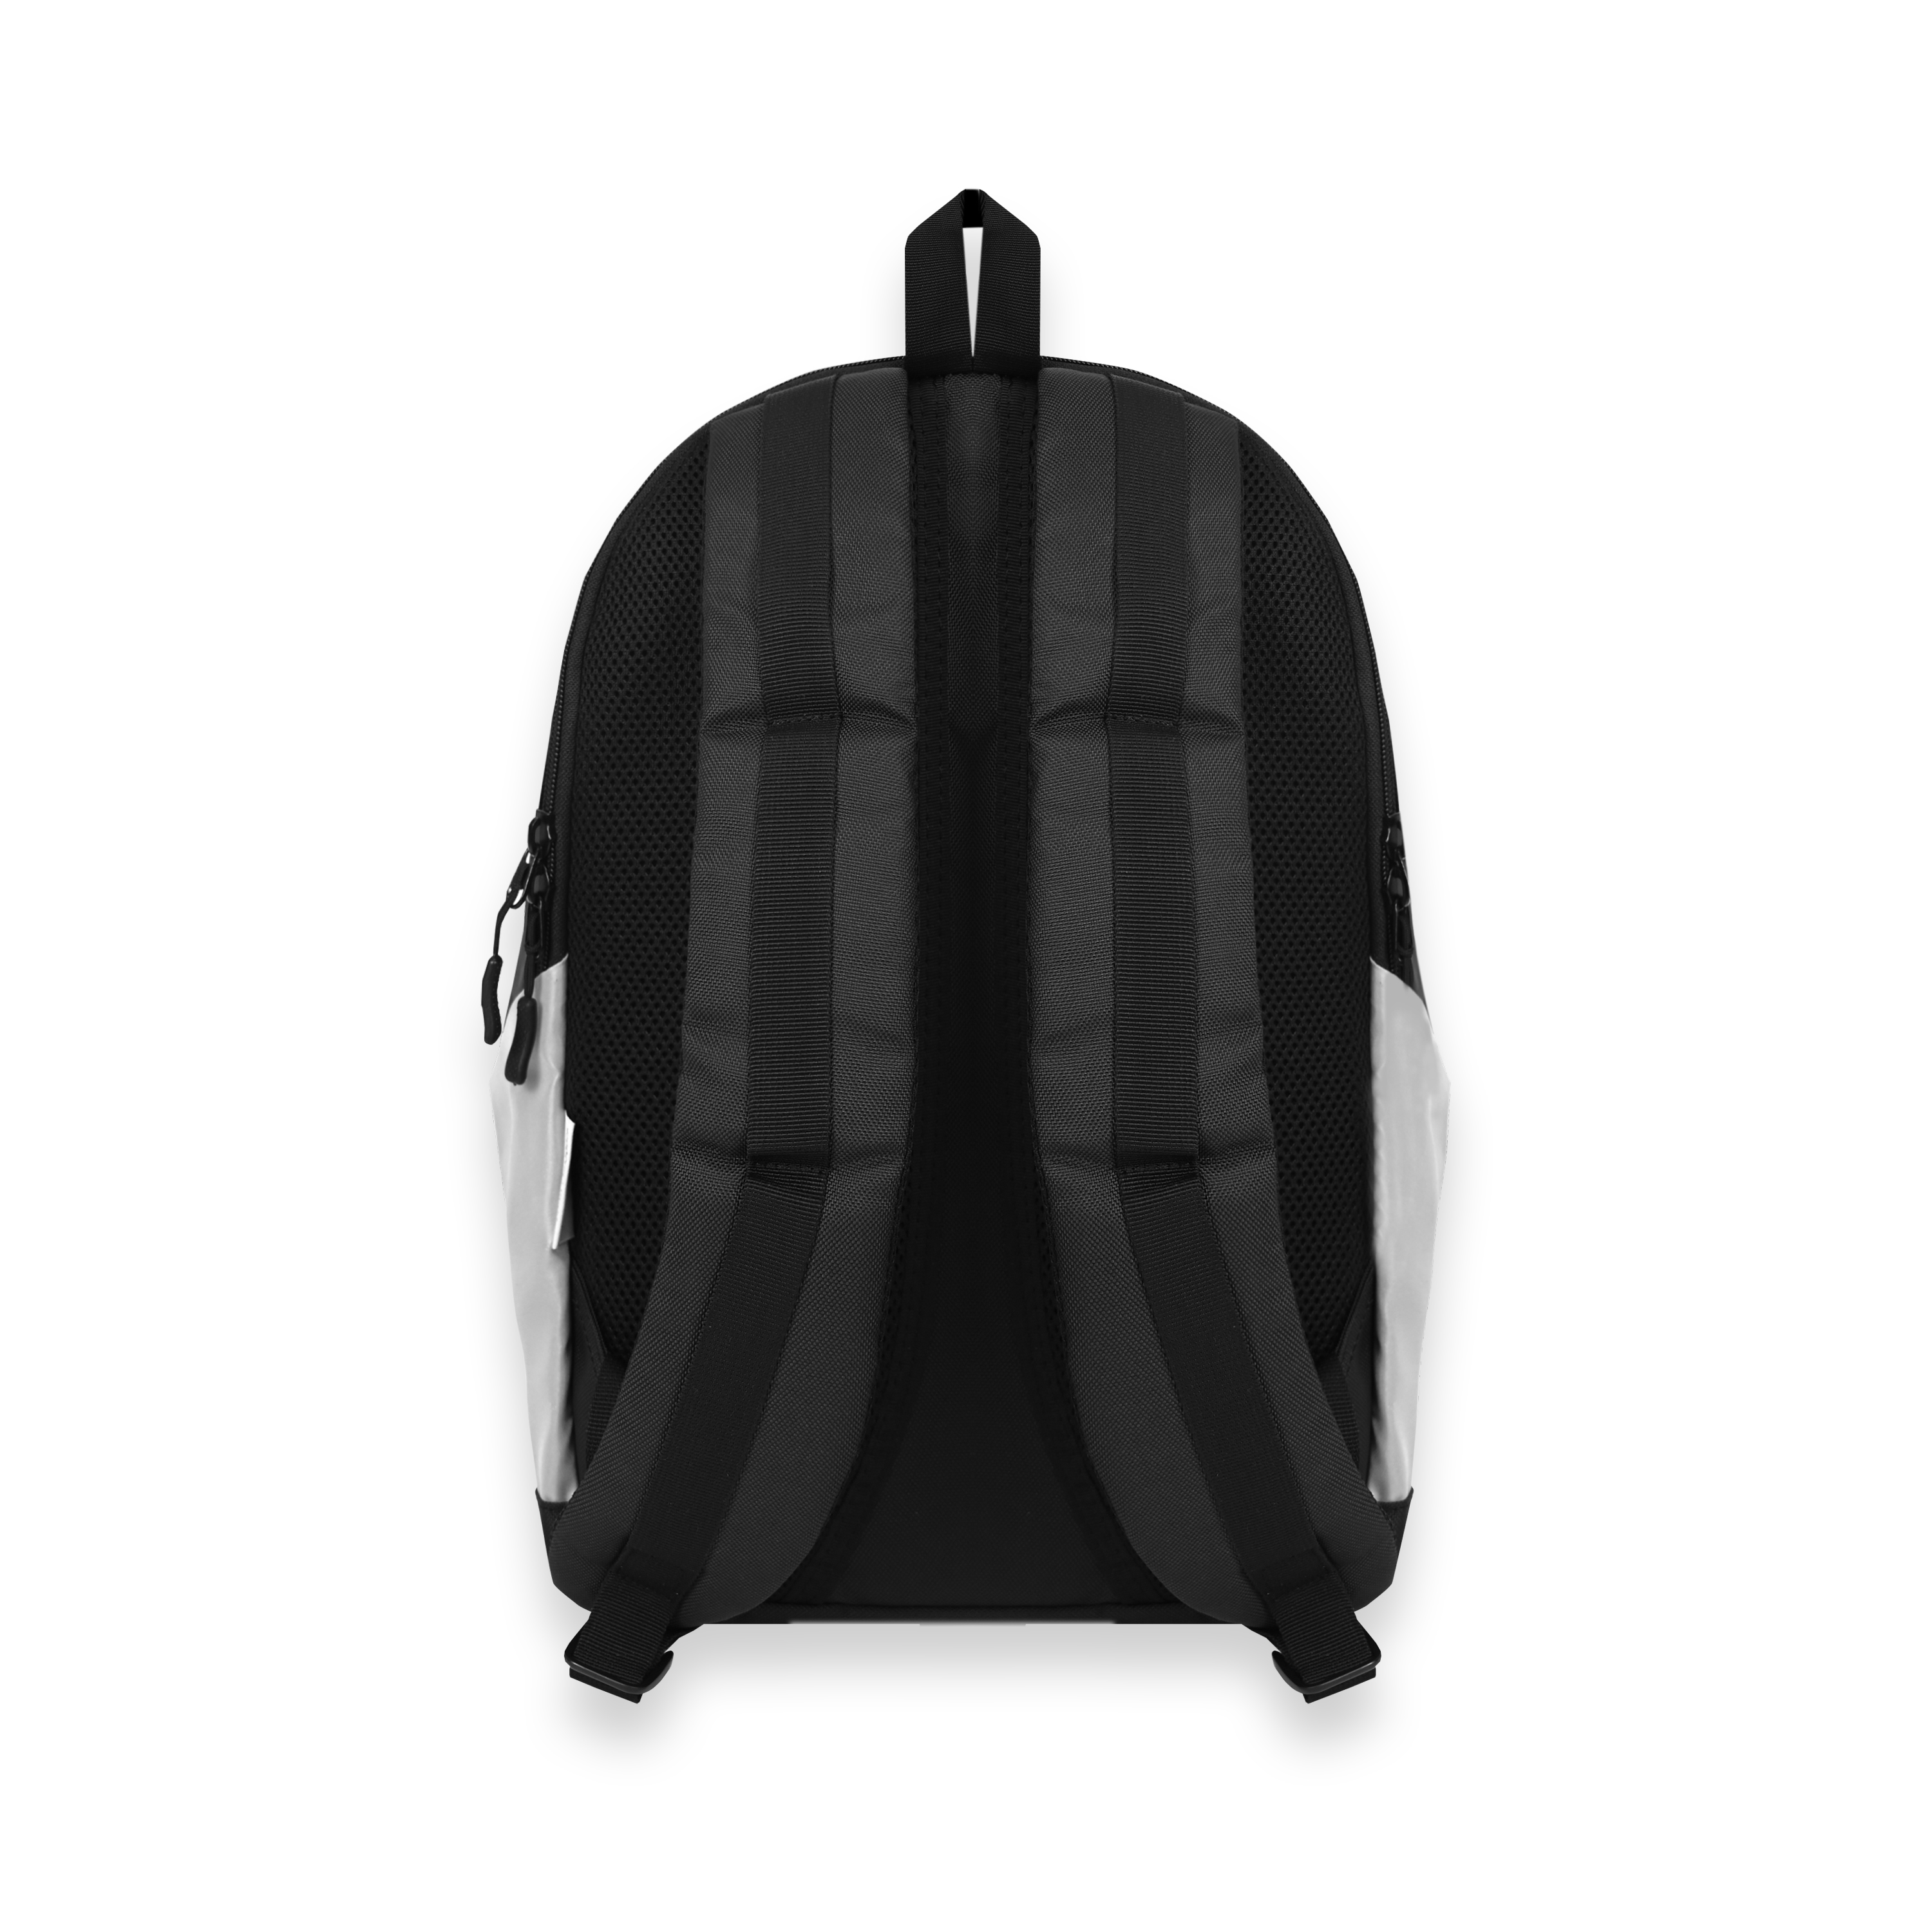 Balo Phản Quang SAIGON SWAGGER - SGS Reflective Backpack Ngăn Chống Sốc Lap 15inch